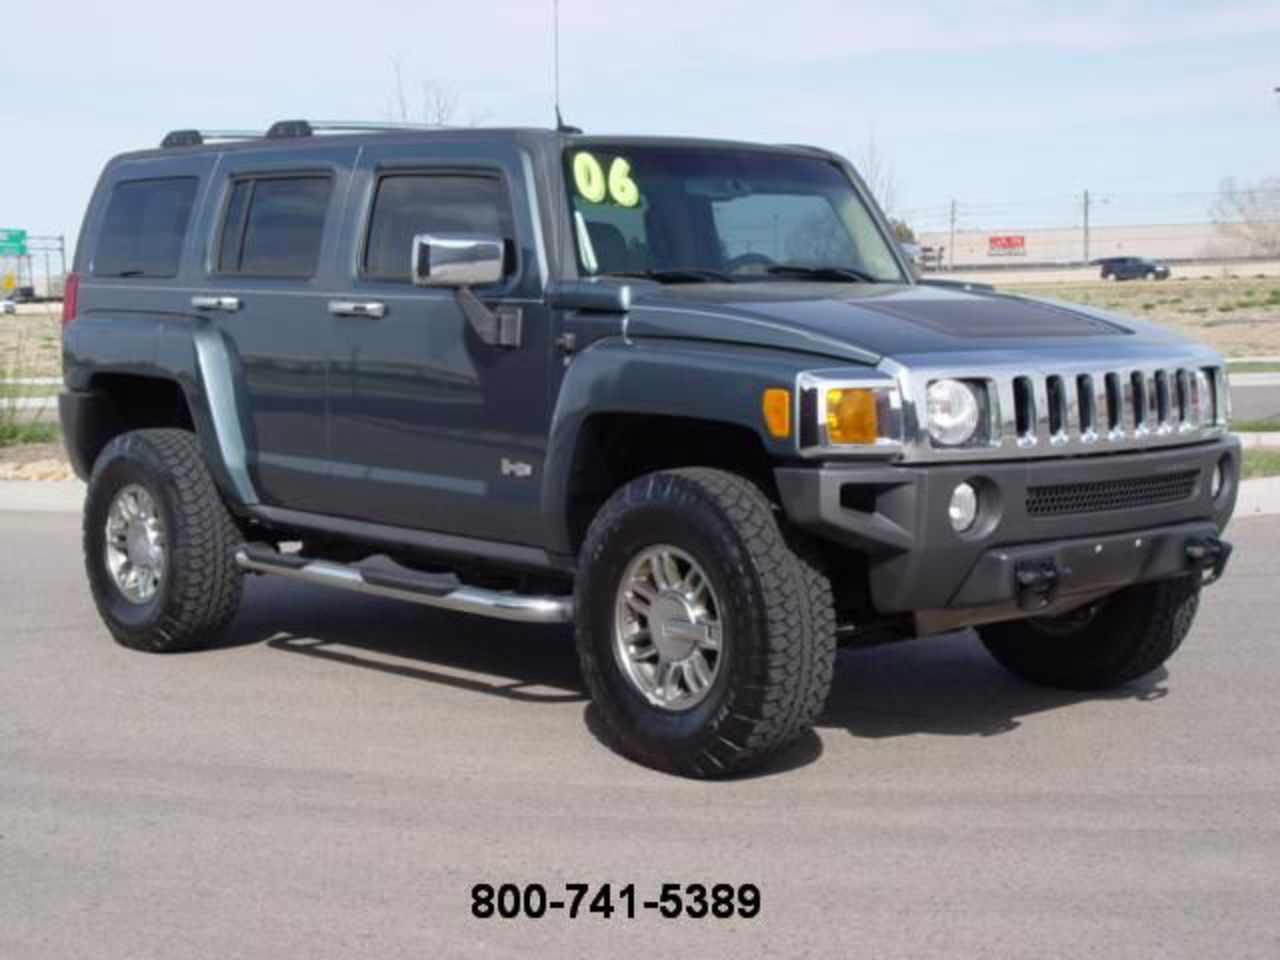 AM General Hummer H3 Pictures & Wallpapers - Wallpaper #3 of 6